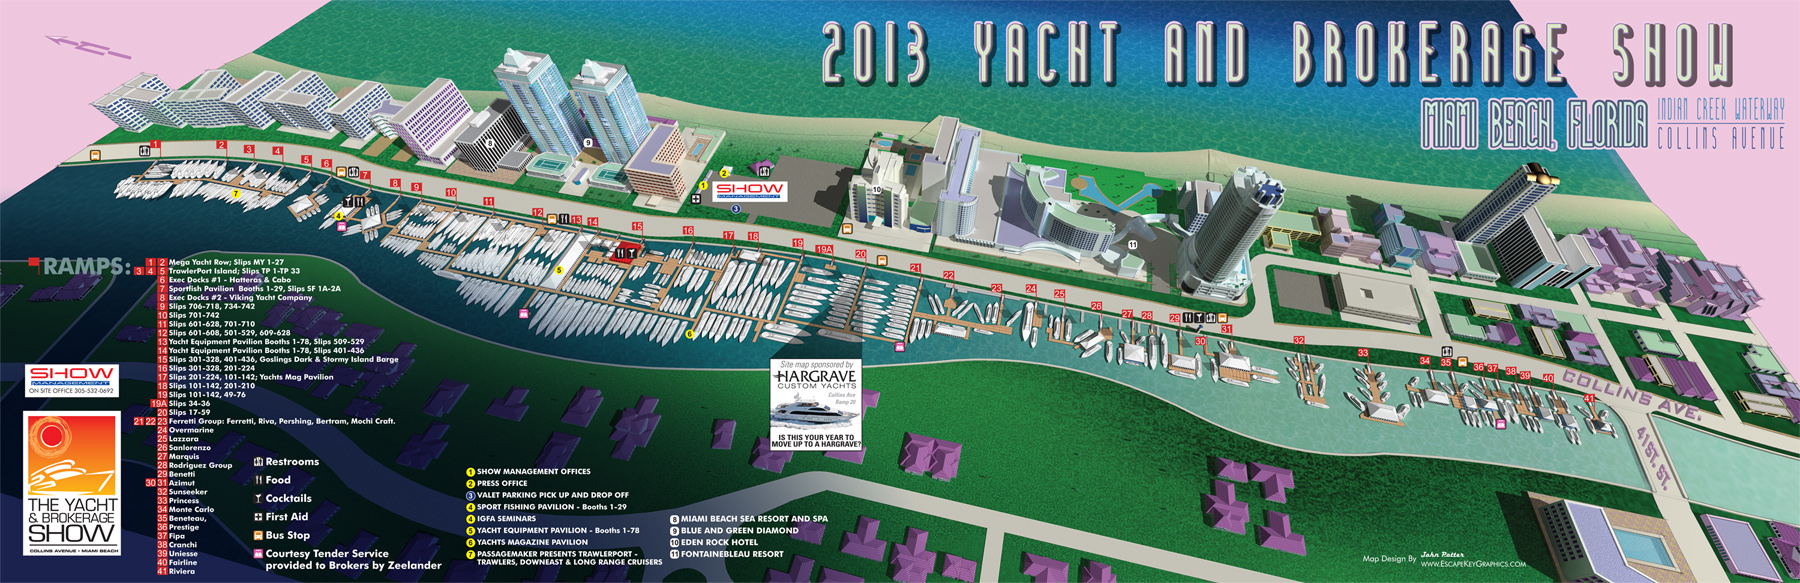 Yacht and Brokerage Show in Miami Beach 2013 map